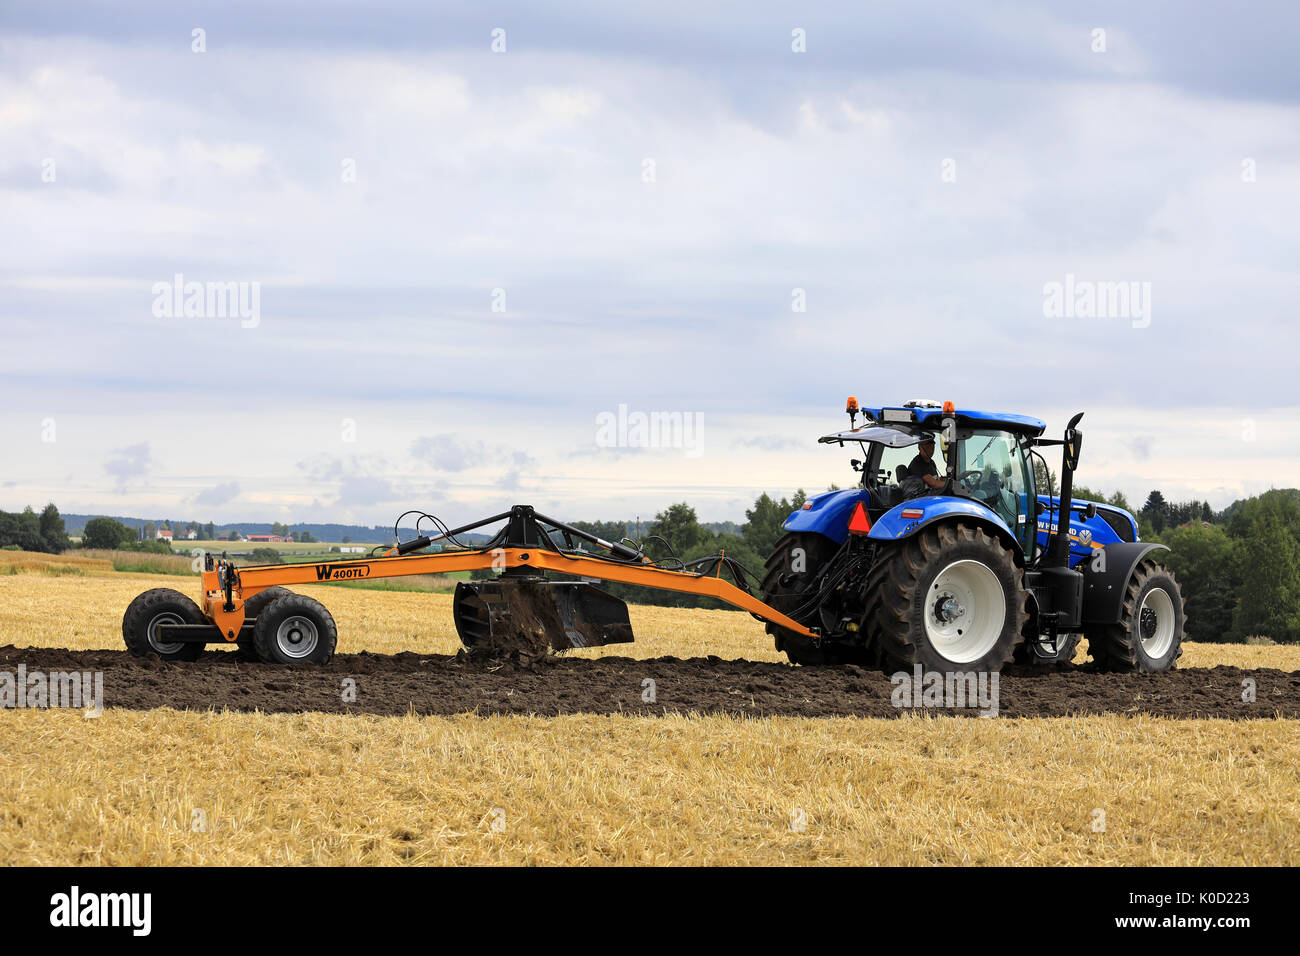 Leveling Field Stock Photos & Leveling Field Stock Images - Alamy1300 x 956